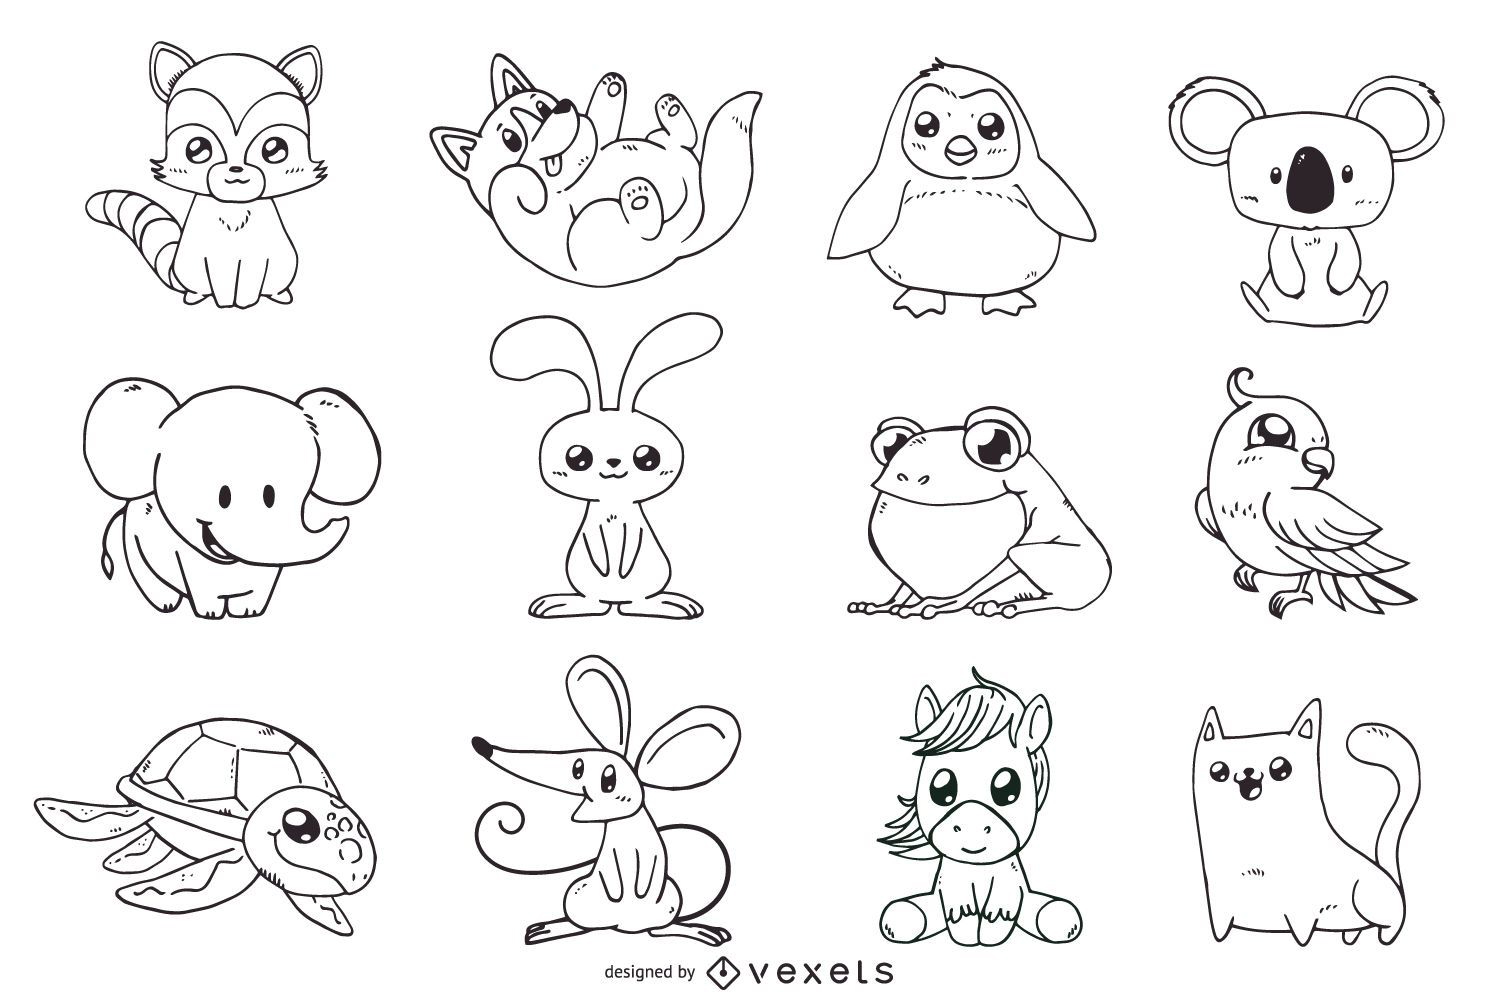 Simple Animal Outlines Image result for simple animal template , 